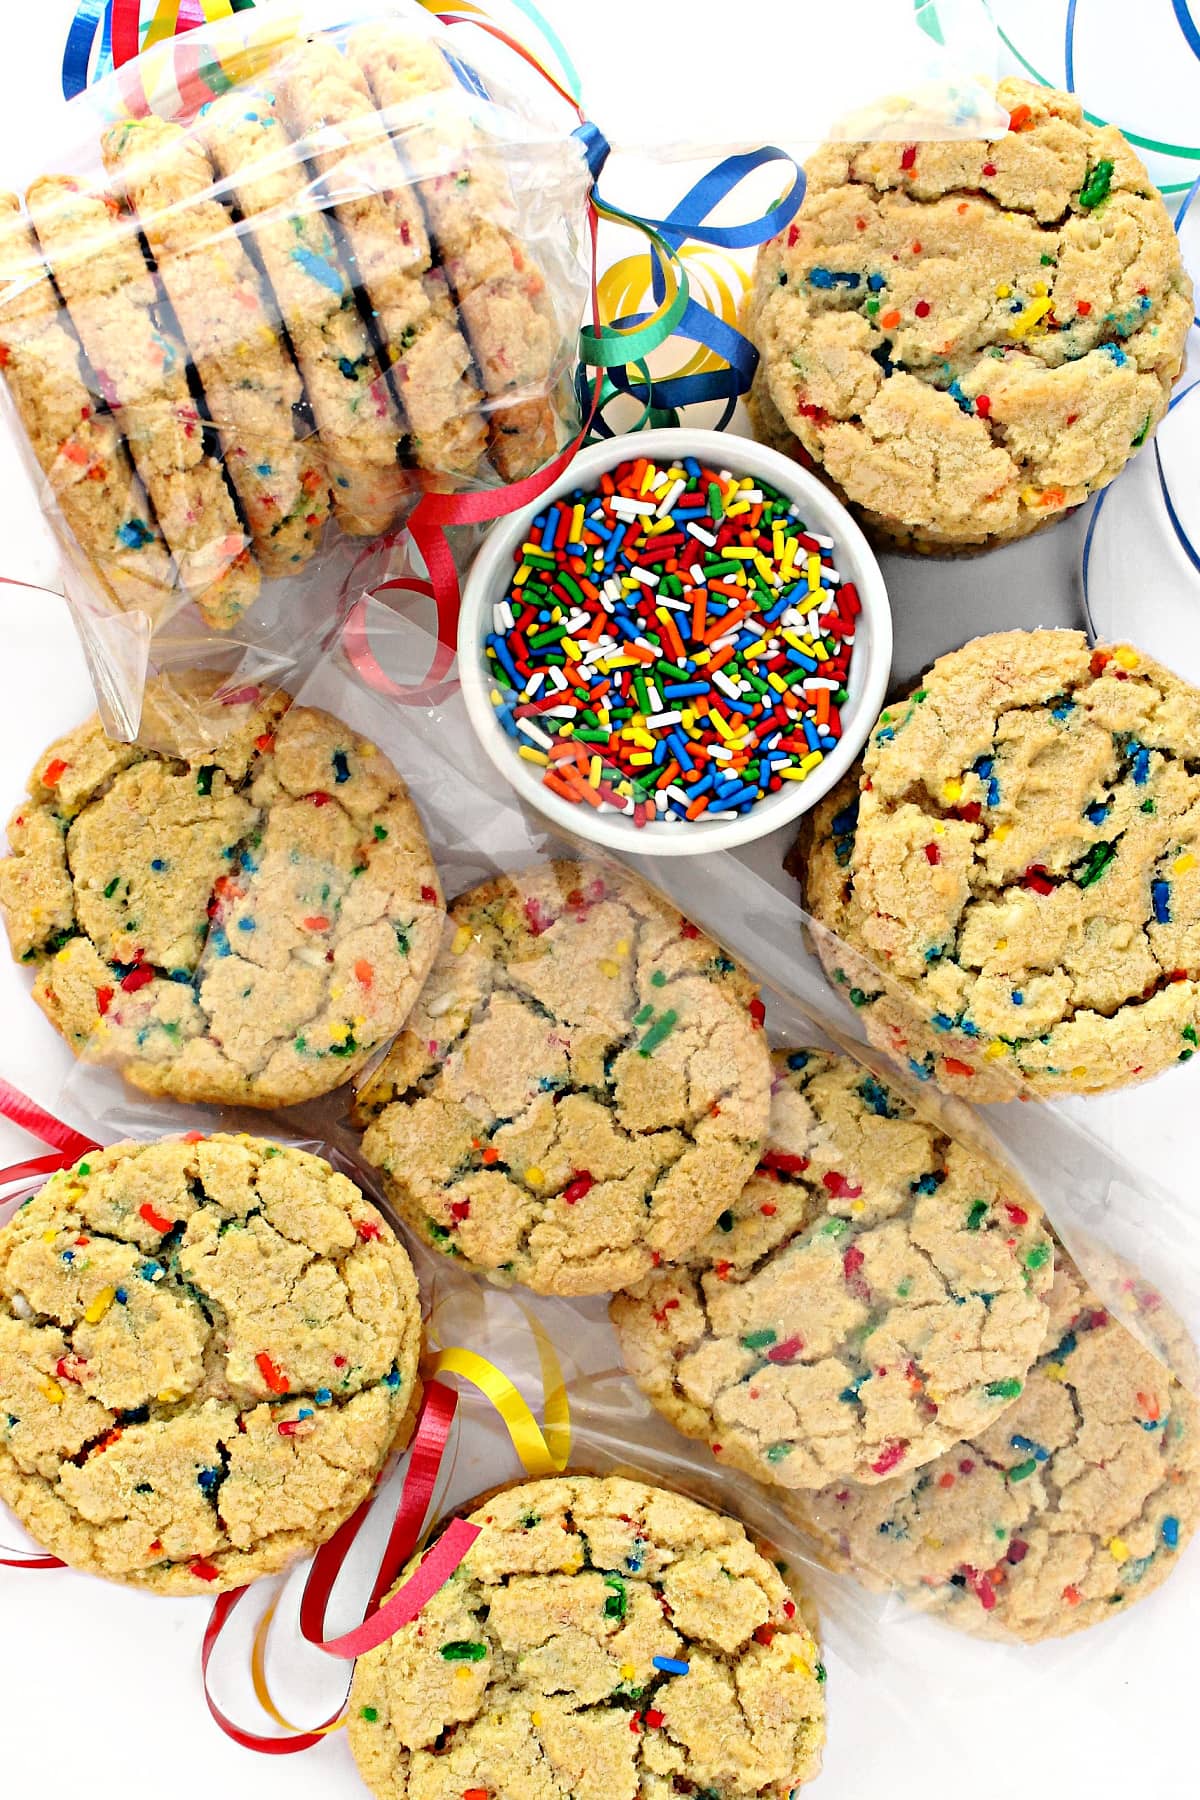 Funfetti Cookies, with rainbow sprinkles baked into the dough.